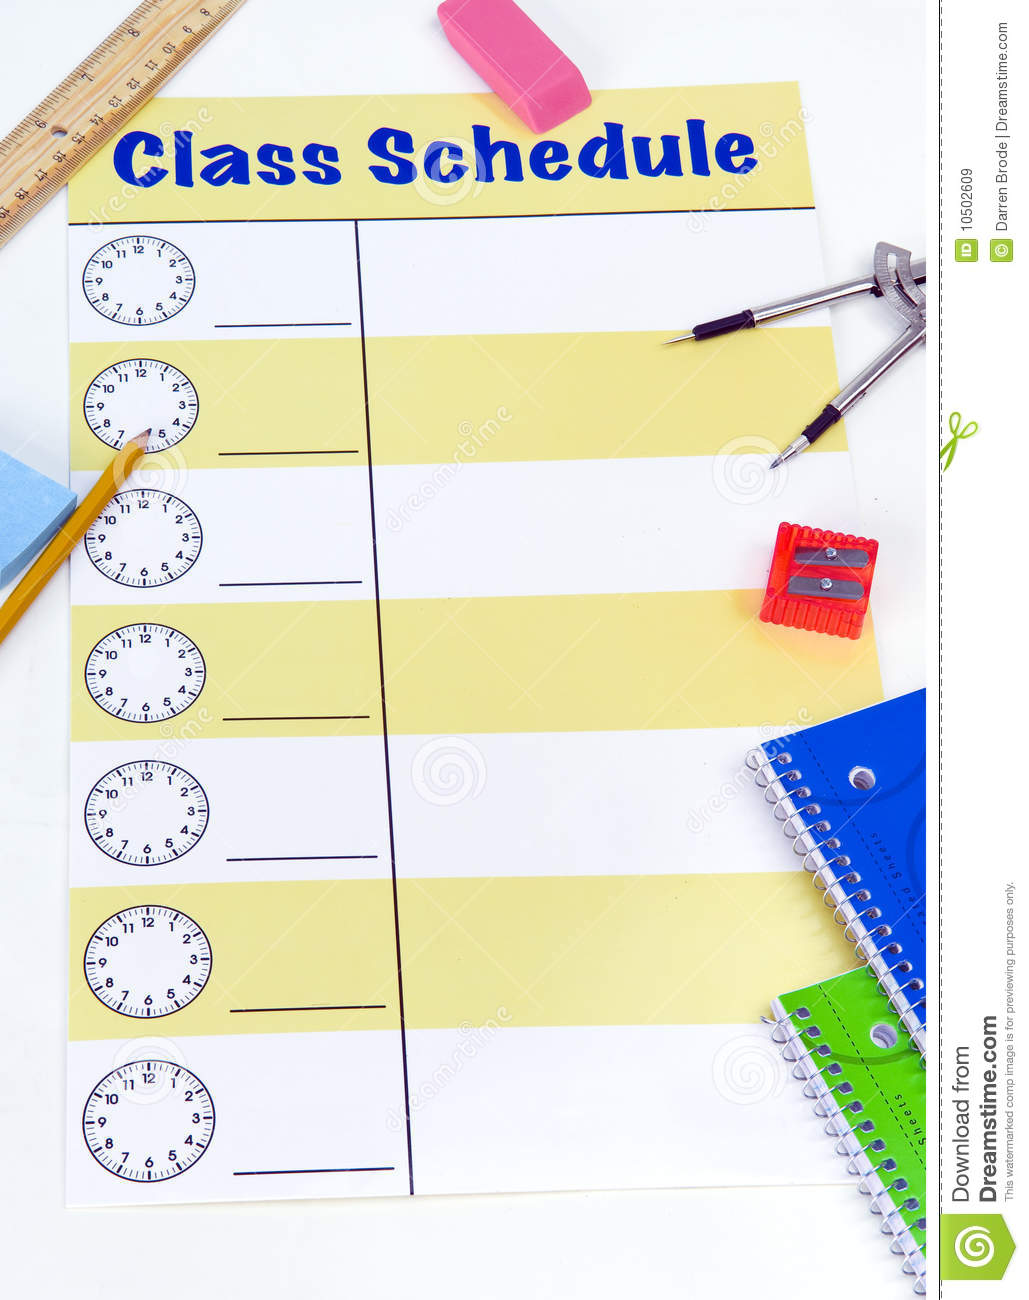 Class Schedule Blank Royalty Free Stock Images   Image  10502609